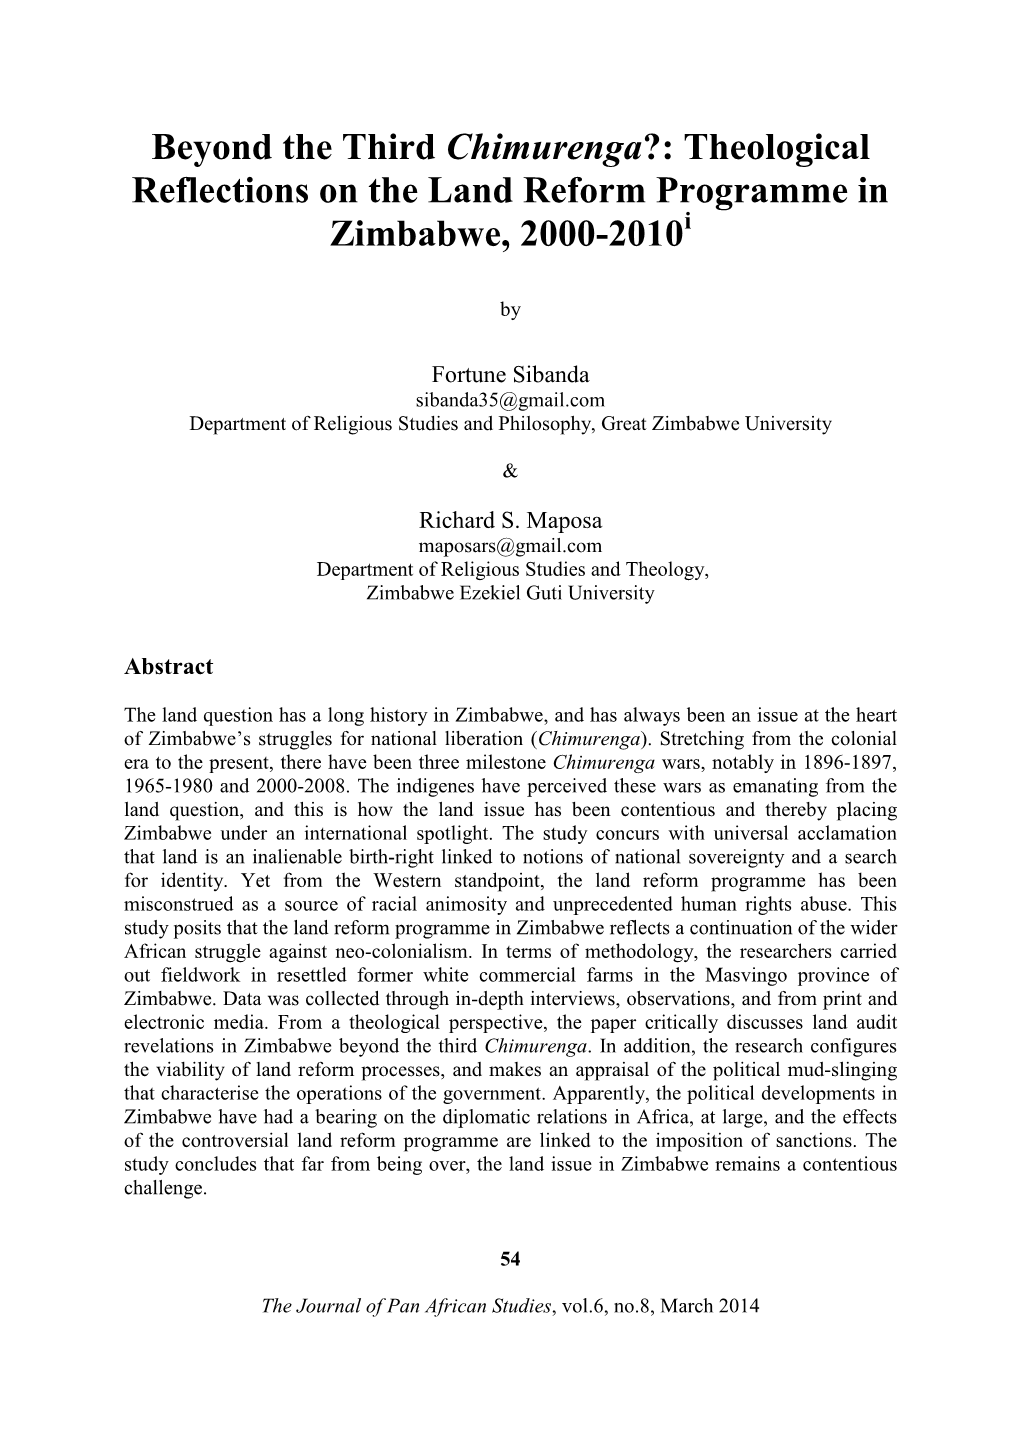 Beyond the Third Chimurenga?: Theological Reflections on the Land Reform Programme in Zimbabwe, 2000-2010I